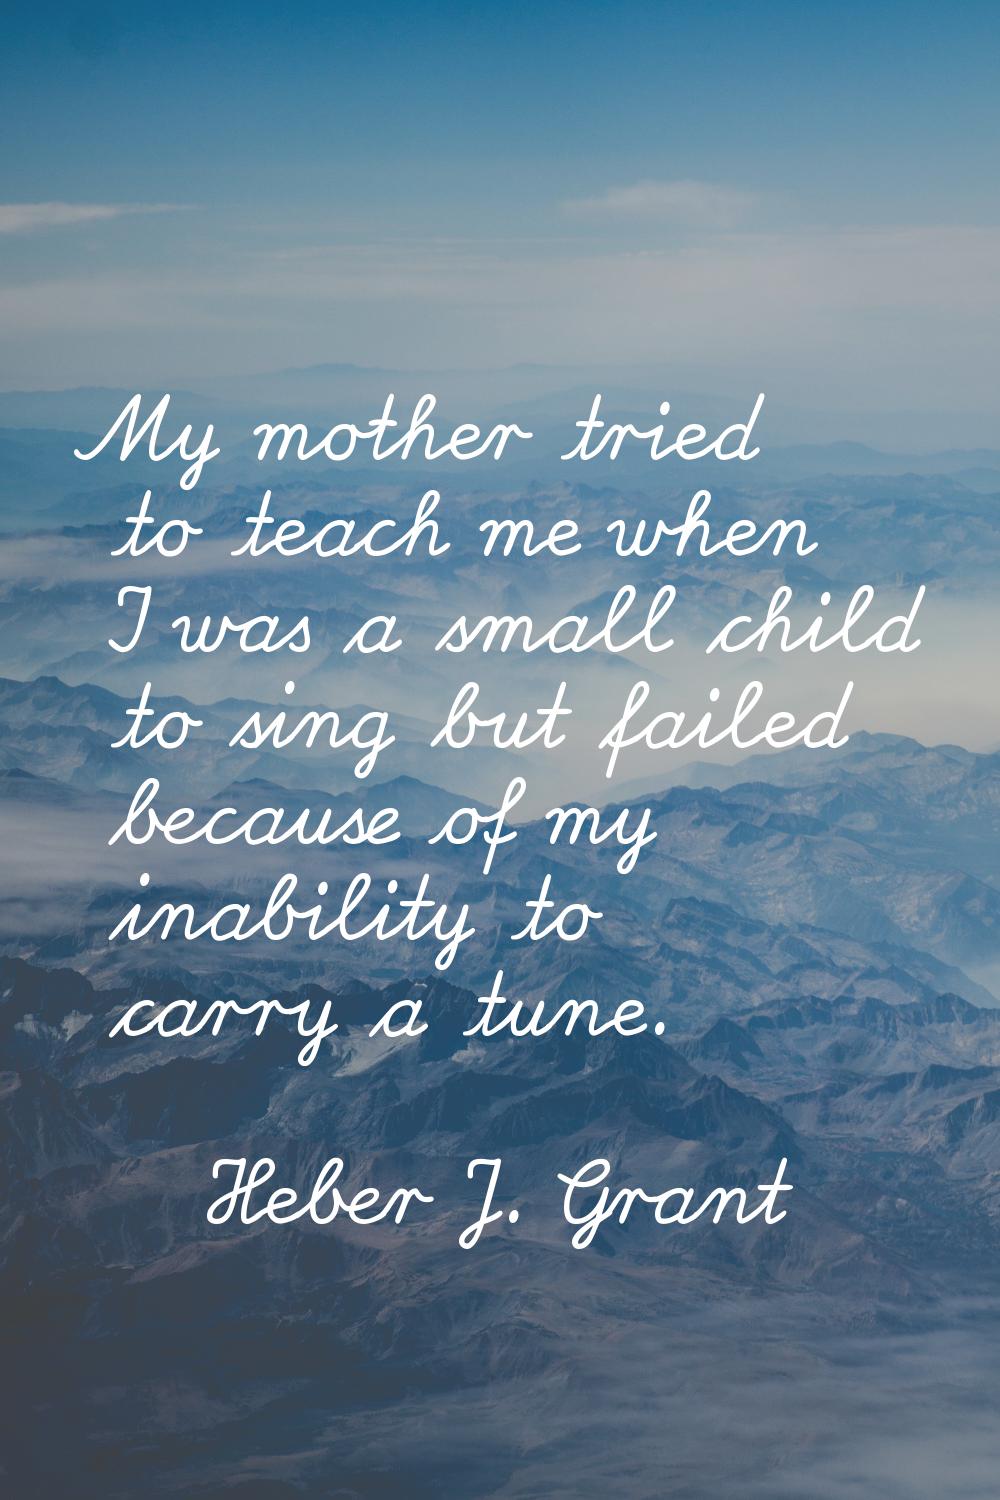 My mother tried to teach me when I was a small child to sing but failed because of my inability to 